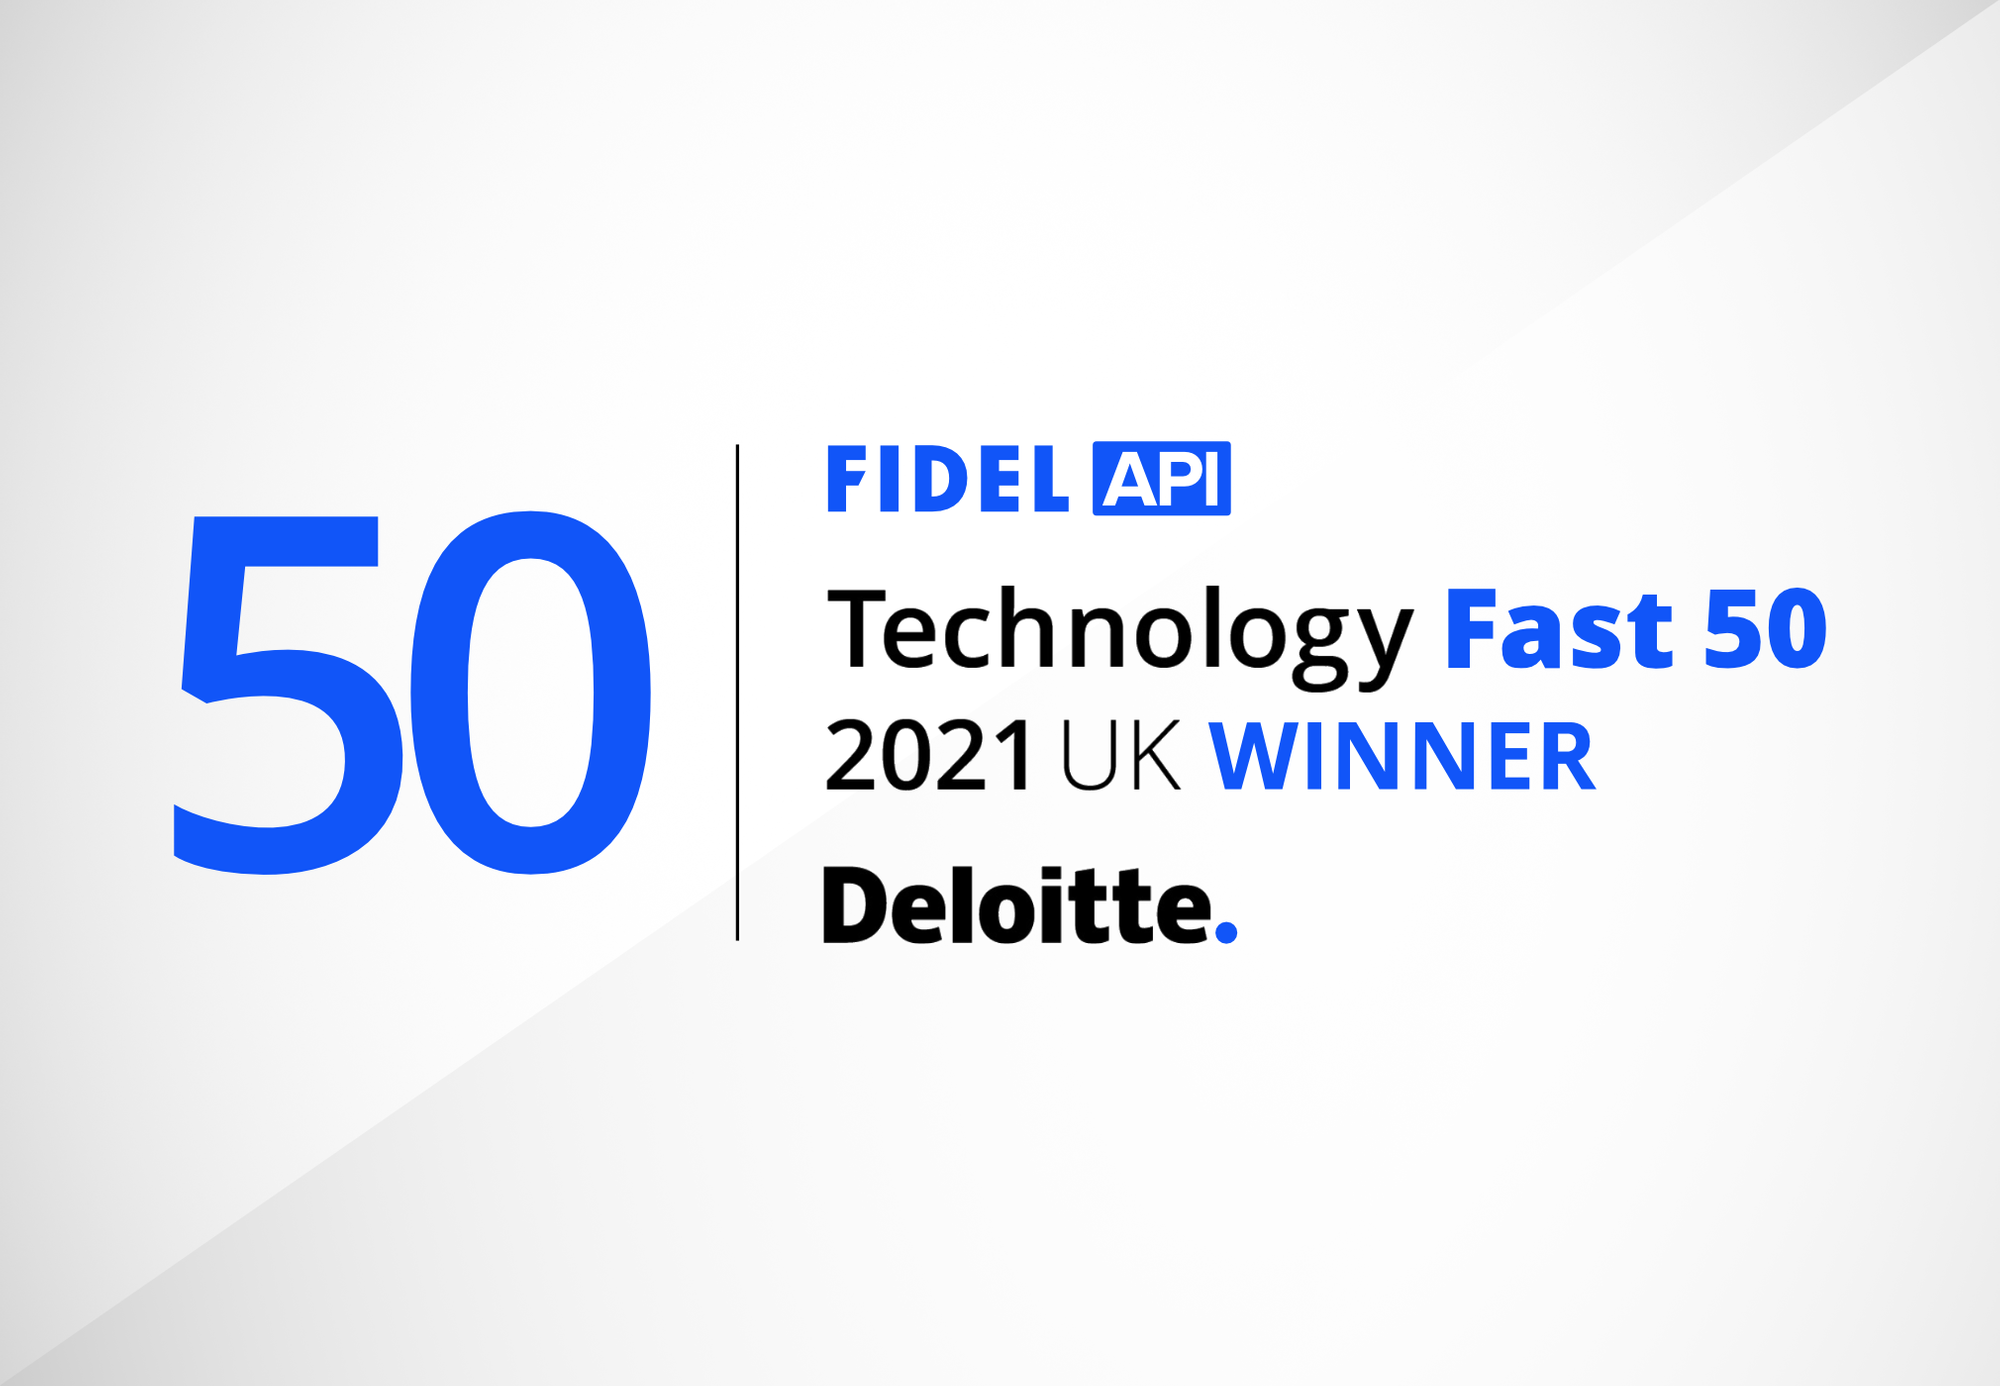 Fidel API Recognized by Deloitte as One of the Fastest Growing UK Tech Companies